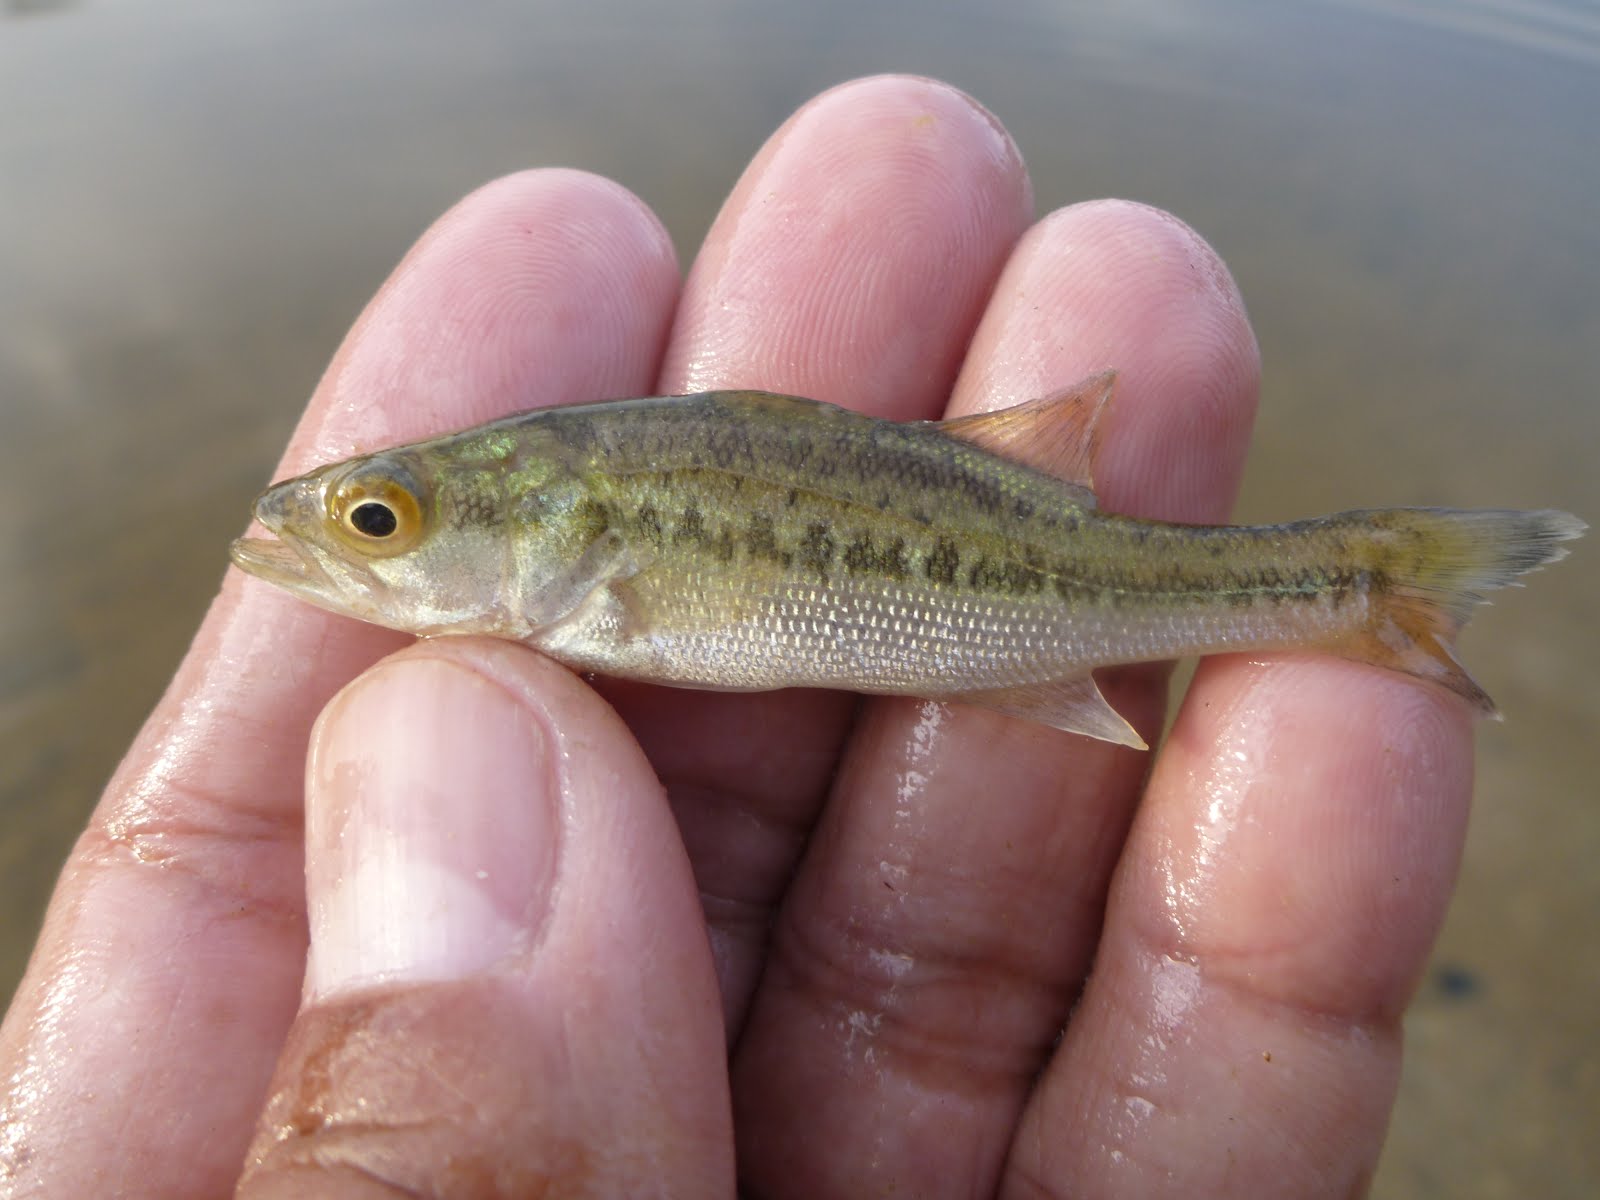 The Life Amphibious: The smallest smallmouth bass